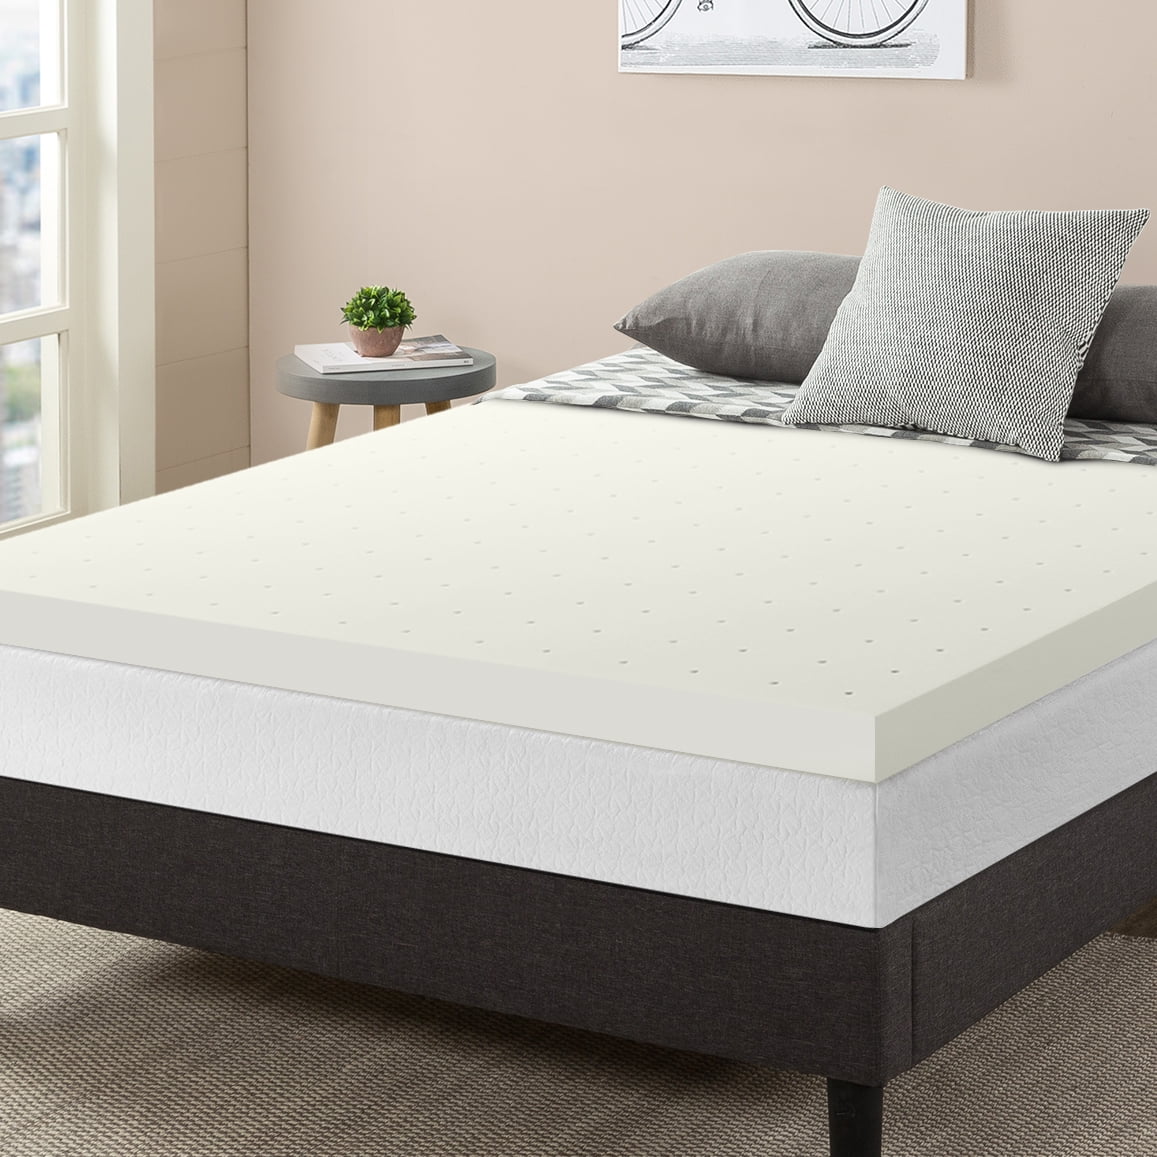 Details about   Memory Foam Mattress Topper  4" Spa Sensations Theratouch Comfort Support NEW 